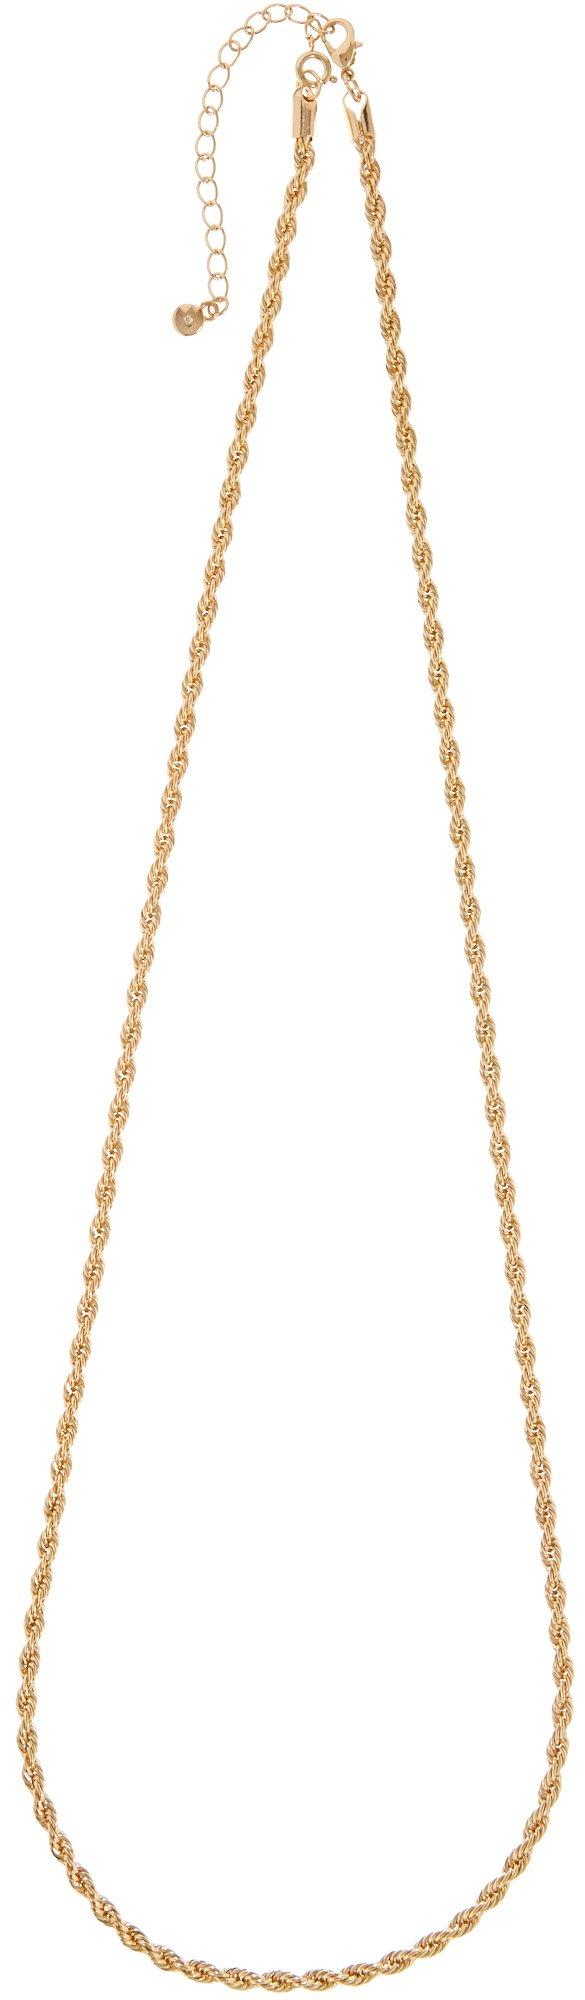 Wearable Art By Roman 30'' Gold Tone Rope Chain Necklace